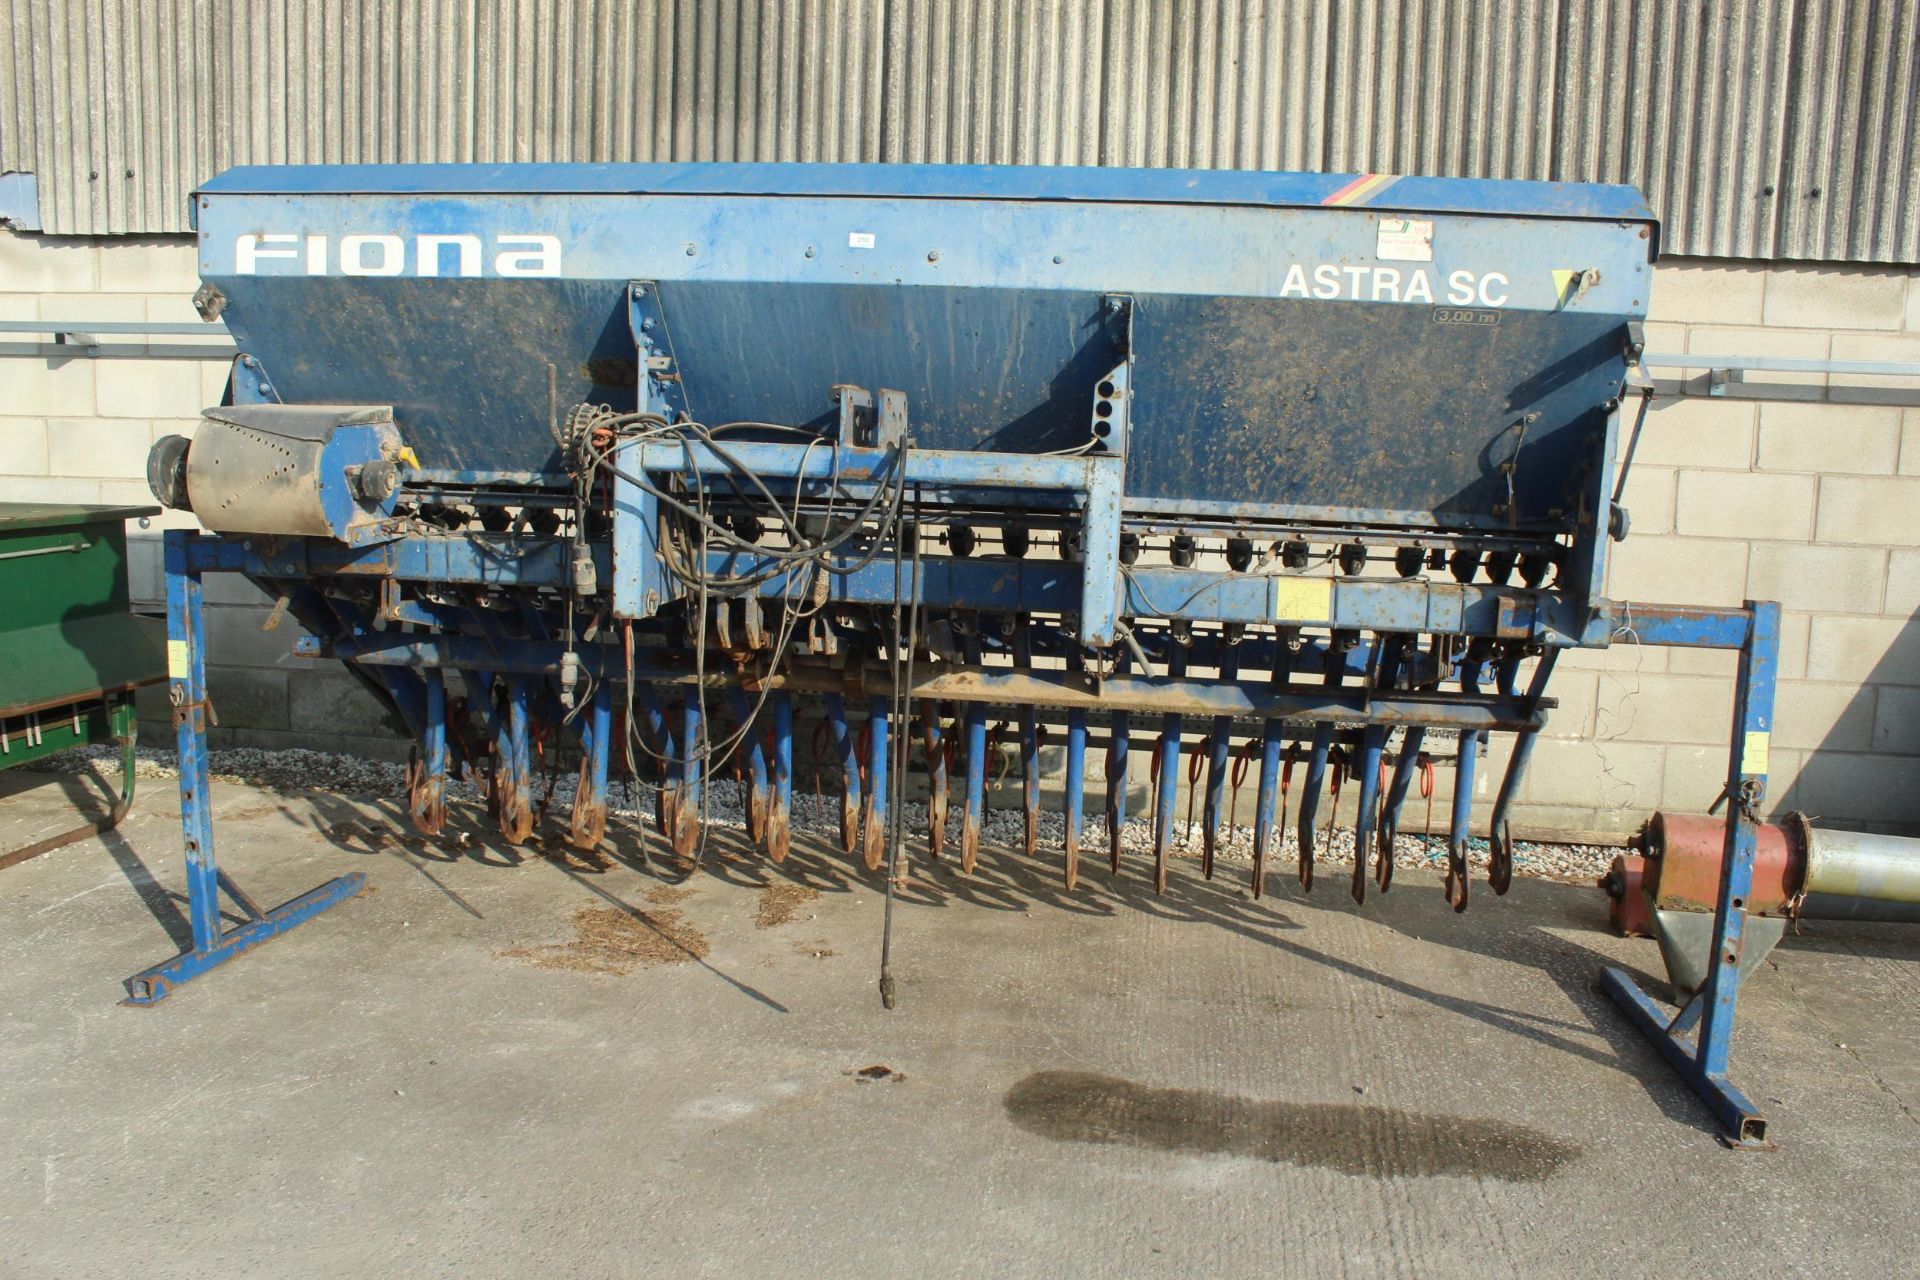 FIONA ASTRA SC 3 METRE SEED DRILL WITH MOUNTING BRACKETS FOR A KHUN POWER HARROW & ELECTRIC TRAM